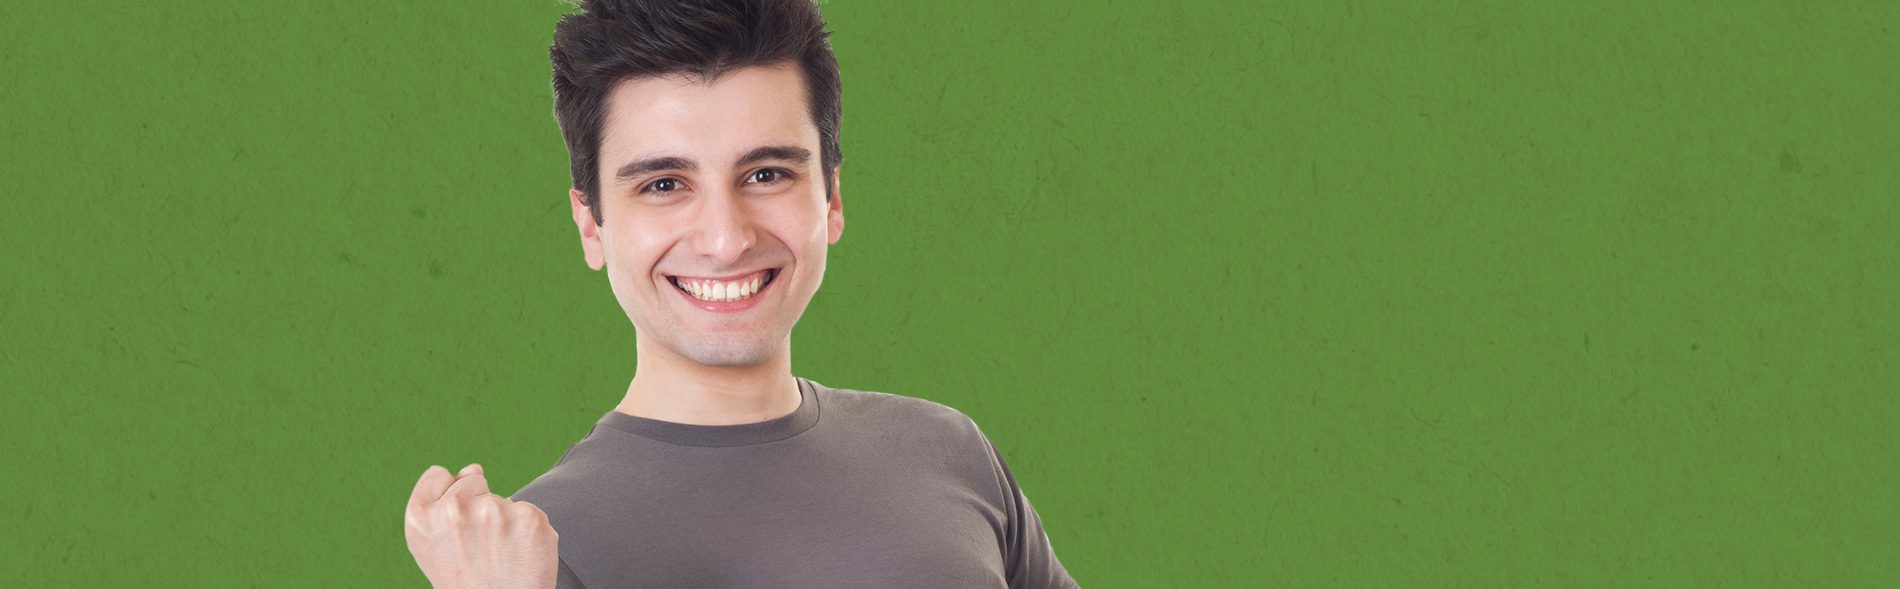 Young boy smiling and wearing a grey tshirt in front of a solid green background.